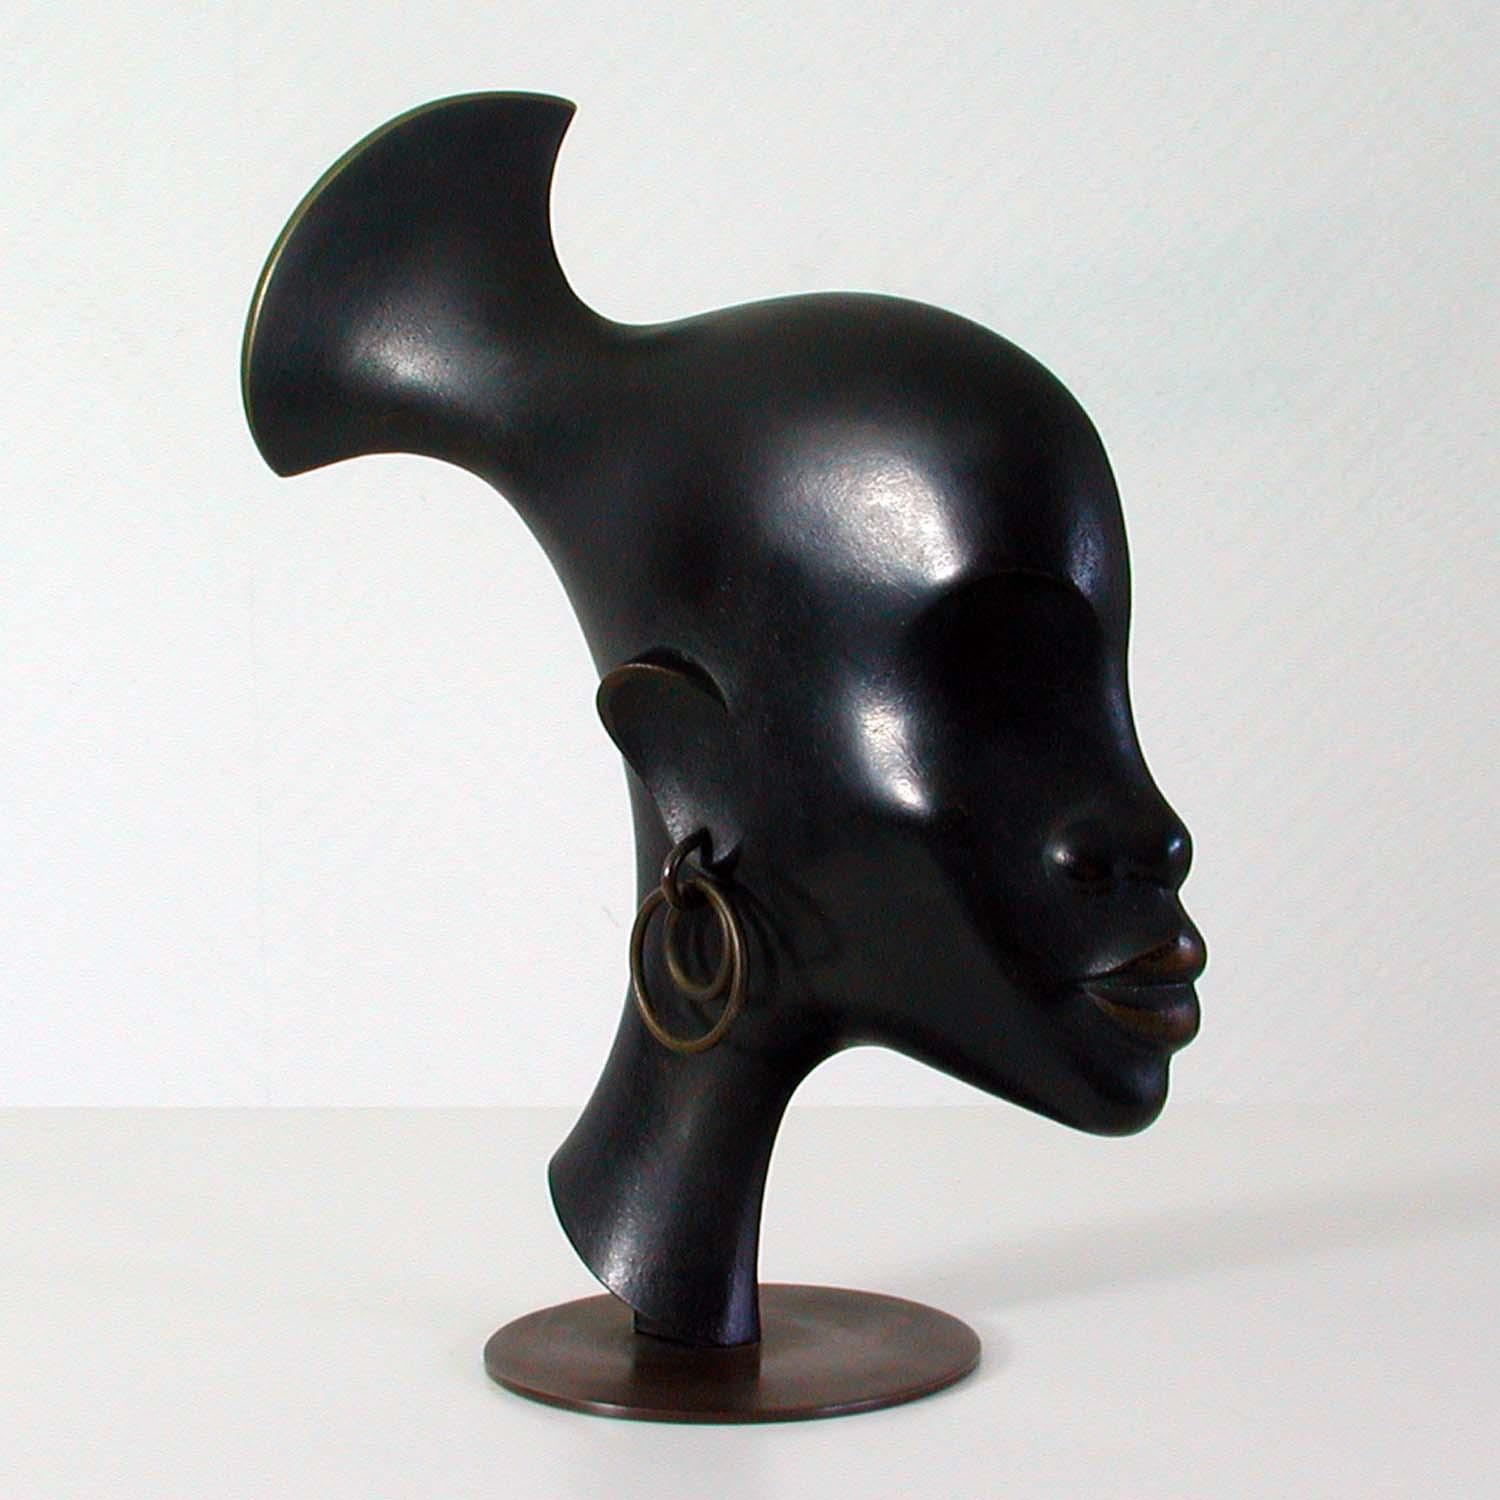 This beautiful sculpture was designed and manufactured by Karl Hagenauer in Vienna in the 1930s during the Art Deco era.

It shows the head of an African warrior and is made of patinated bronze.

Stamped on the base WHW (Werkstatten Hagenauer